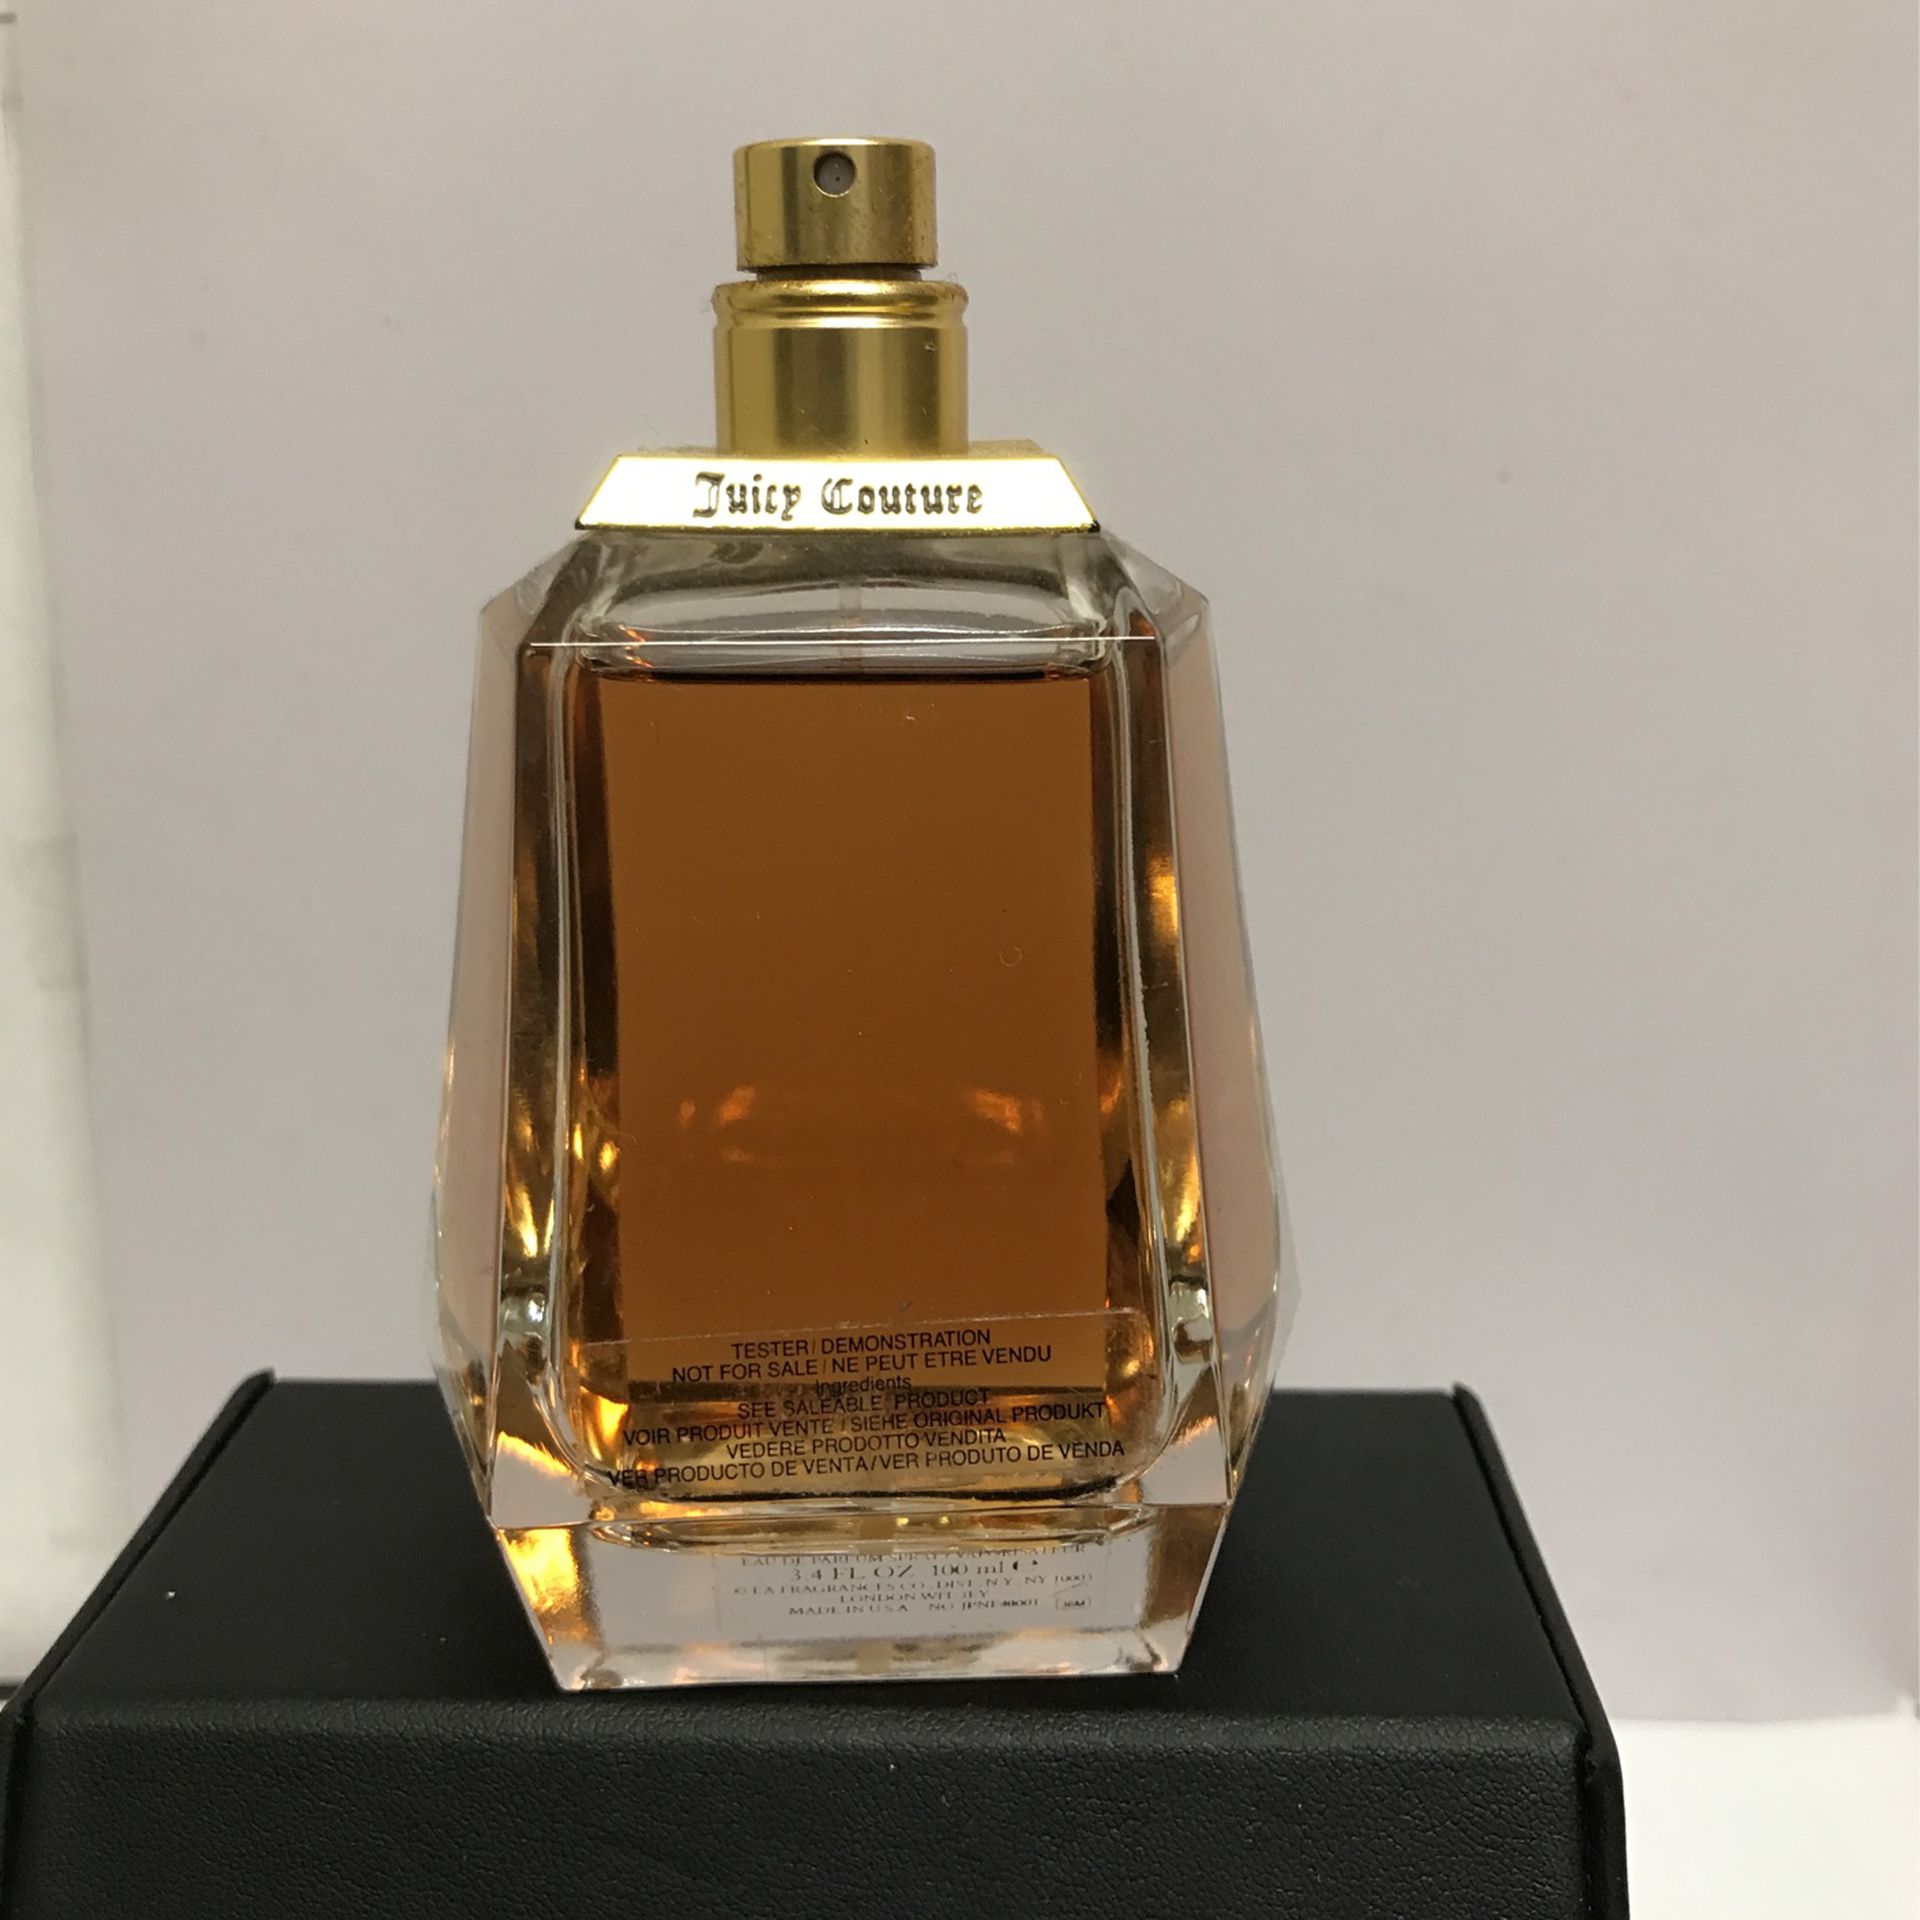 Coco Mademoiselle Perfume for Sale in Rancho Cucamonga, CA - OfferUp